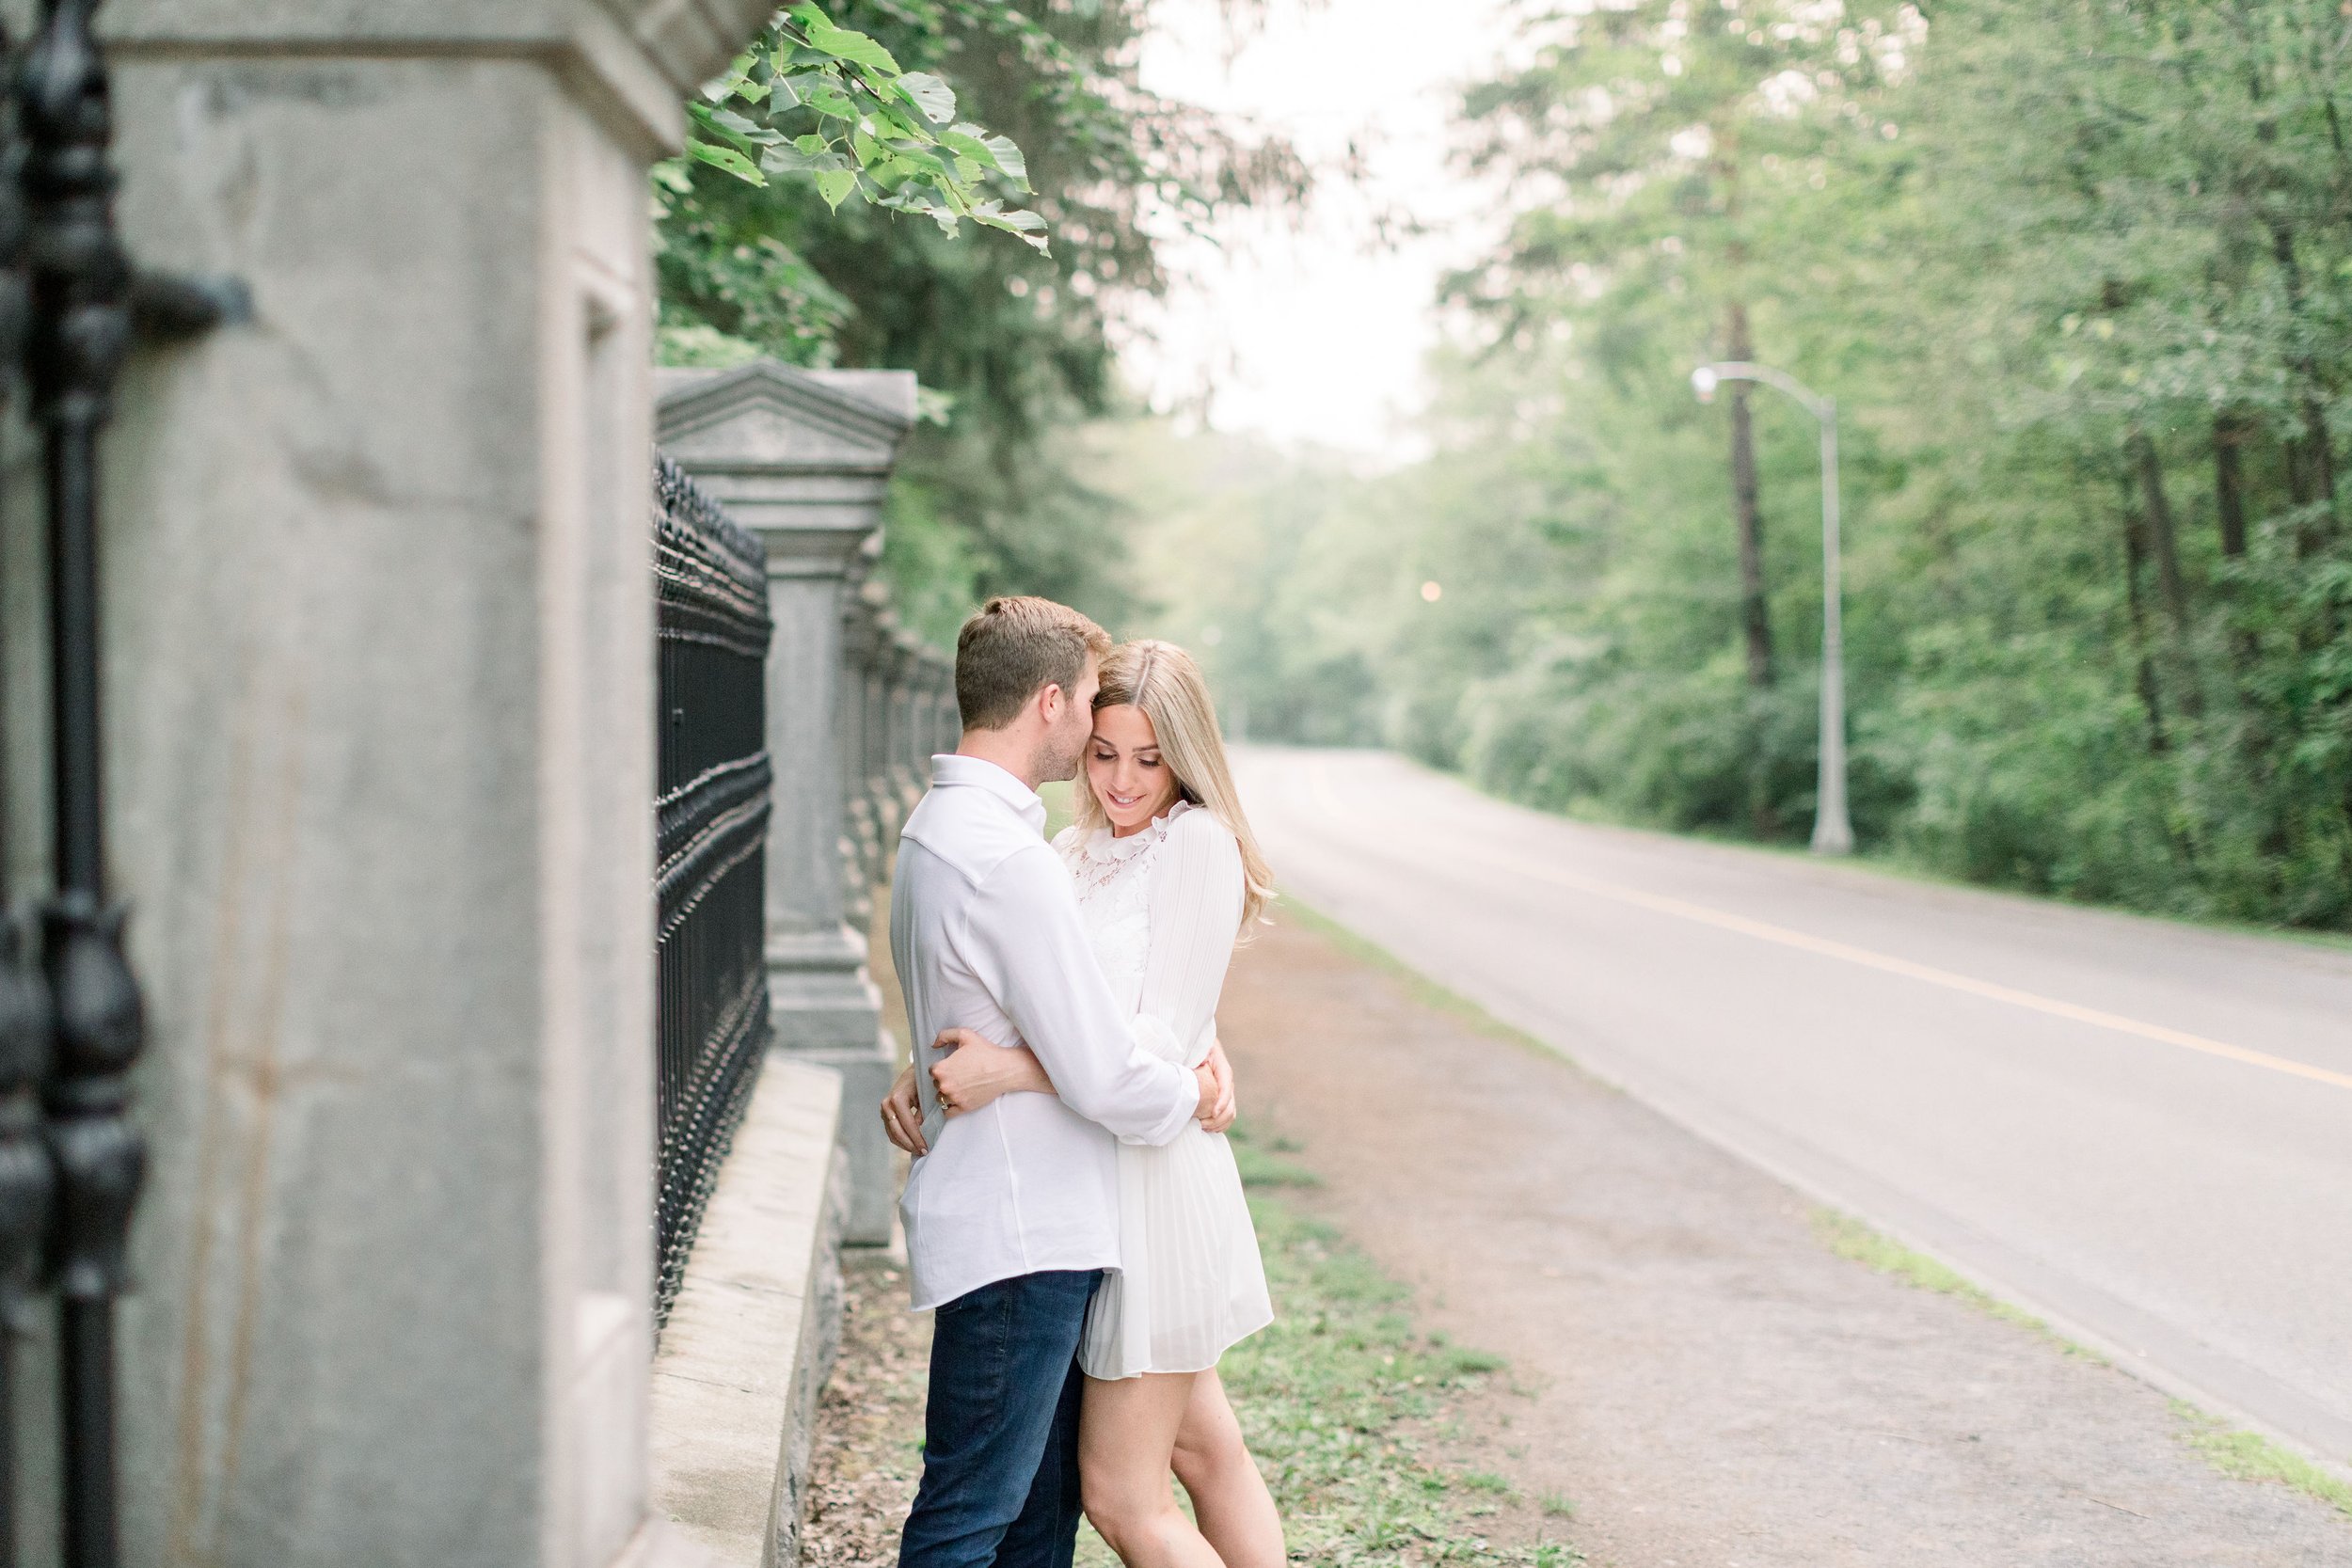  Professional engagement photographer Chelsea Mason Photography captures a man and woman snuggling. breathtaking engagements Ottawa #Ottawaengagements #Ottawaweddingphotographers #engagementwithdogs #ChelseaMasonPhotography #ChelseaMasonEngagements  